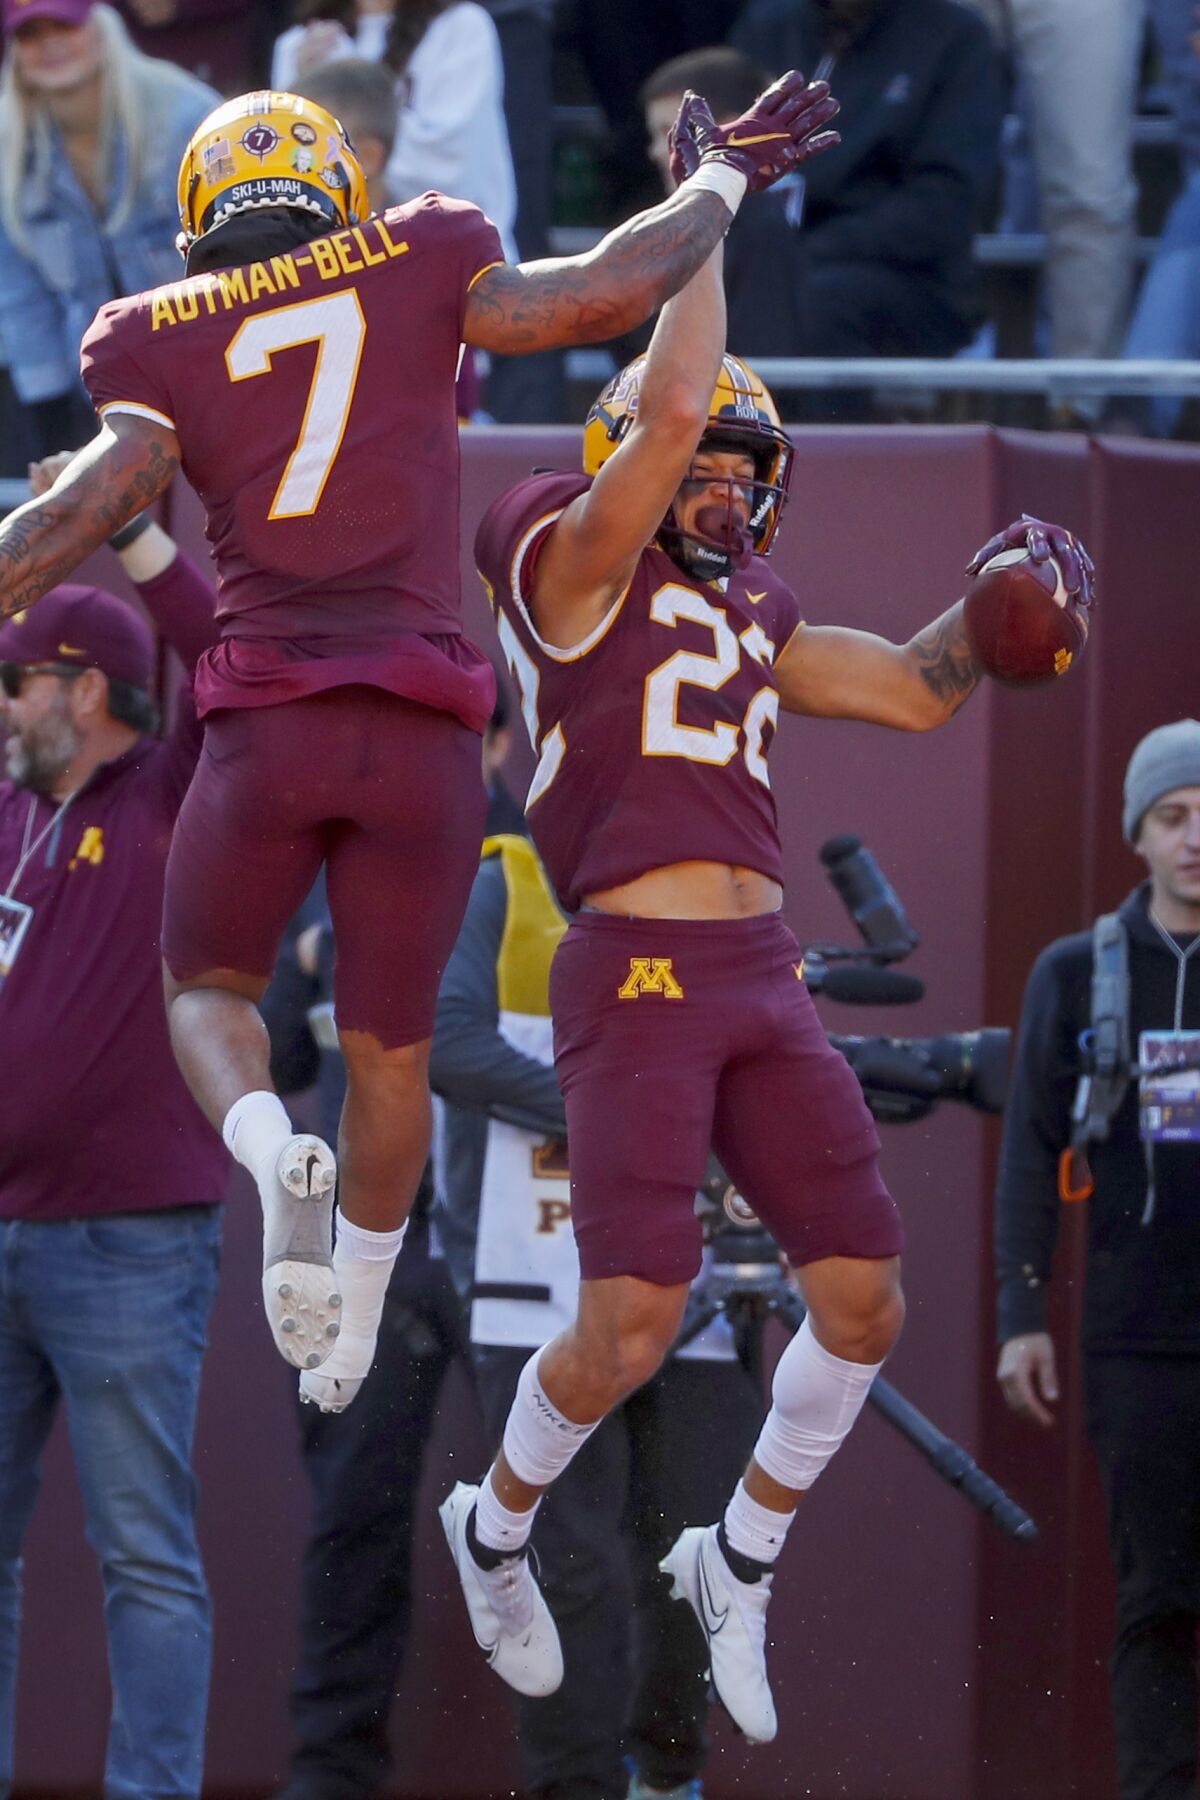 Minnesota wide receiver Mike Brown-Stephens (22) celebrates his touchdown reception with wide receiver Chris Autman-Bell (7) in the second quarter of an NCAA college football game against Nebraska, Saturday, Oct. 16, 2021, in Minneapolis. (AP Photo/Bruce Kluckhohn) /// [EXTERNAL] 103